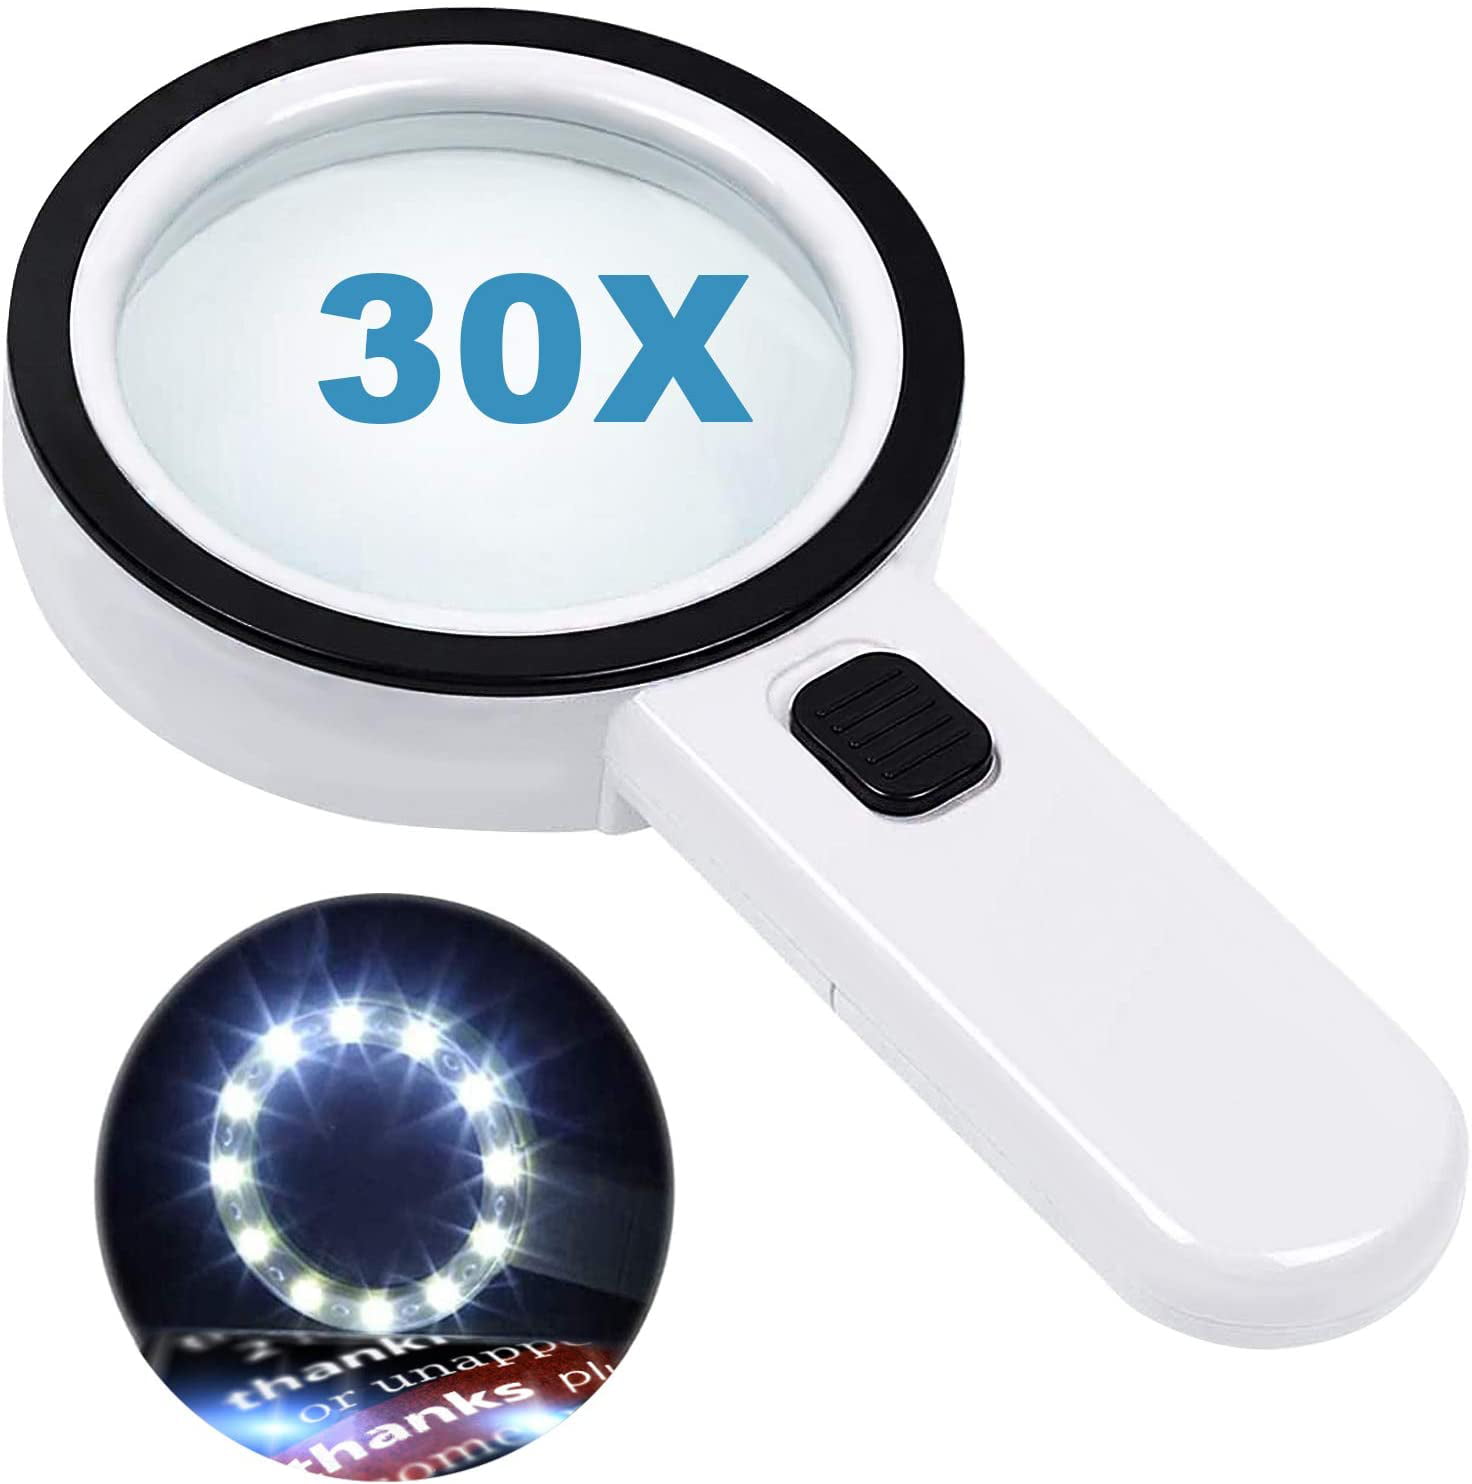 YH-KE Magnifying Glass Optical Glass Lens 5X Desktop Read Portable Read Newspapers Coin Identification Hand Grip Light Weight Suitable for The Elderly Student 70mm Office Supplies 